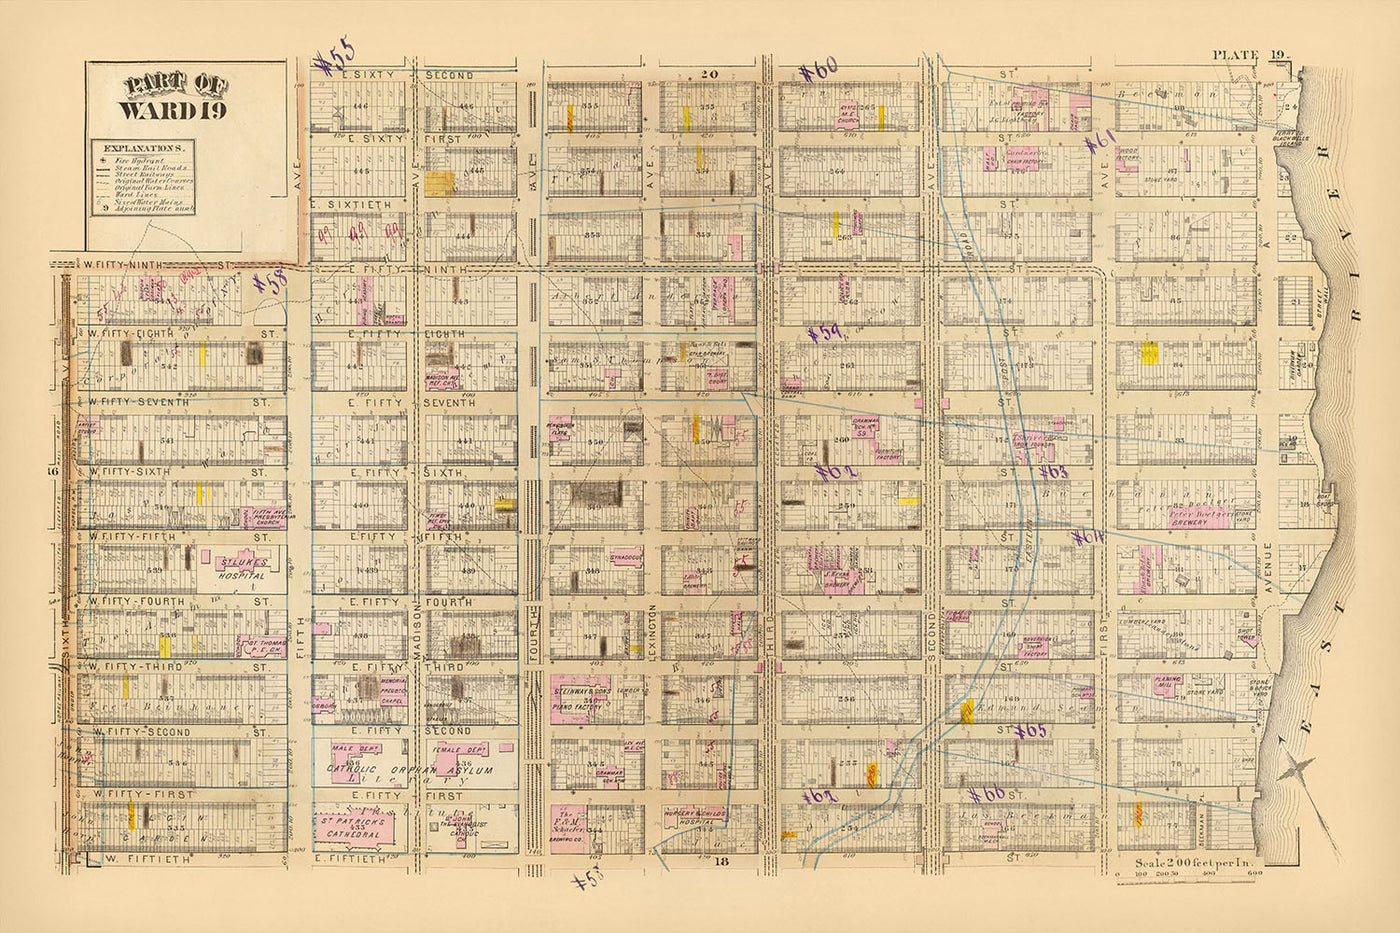 Old Map of Midtown East, NYC, 1879: St. Luke's Hospital, St. Patrick's Cathedral, Steinway & Sons Piano Factory, Ward 19